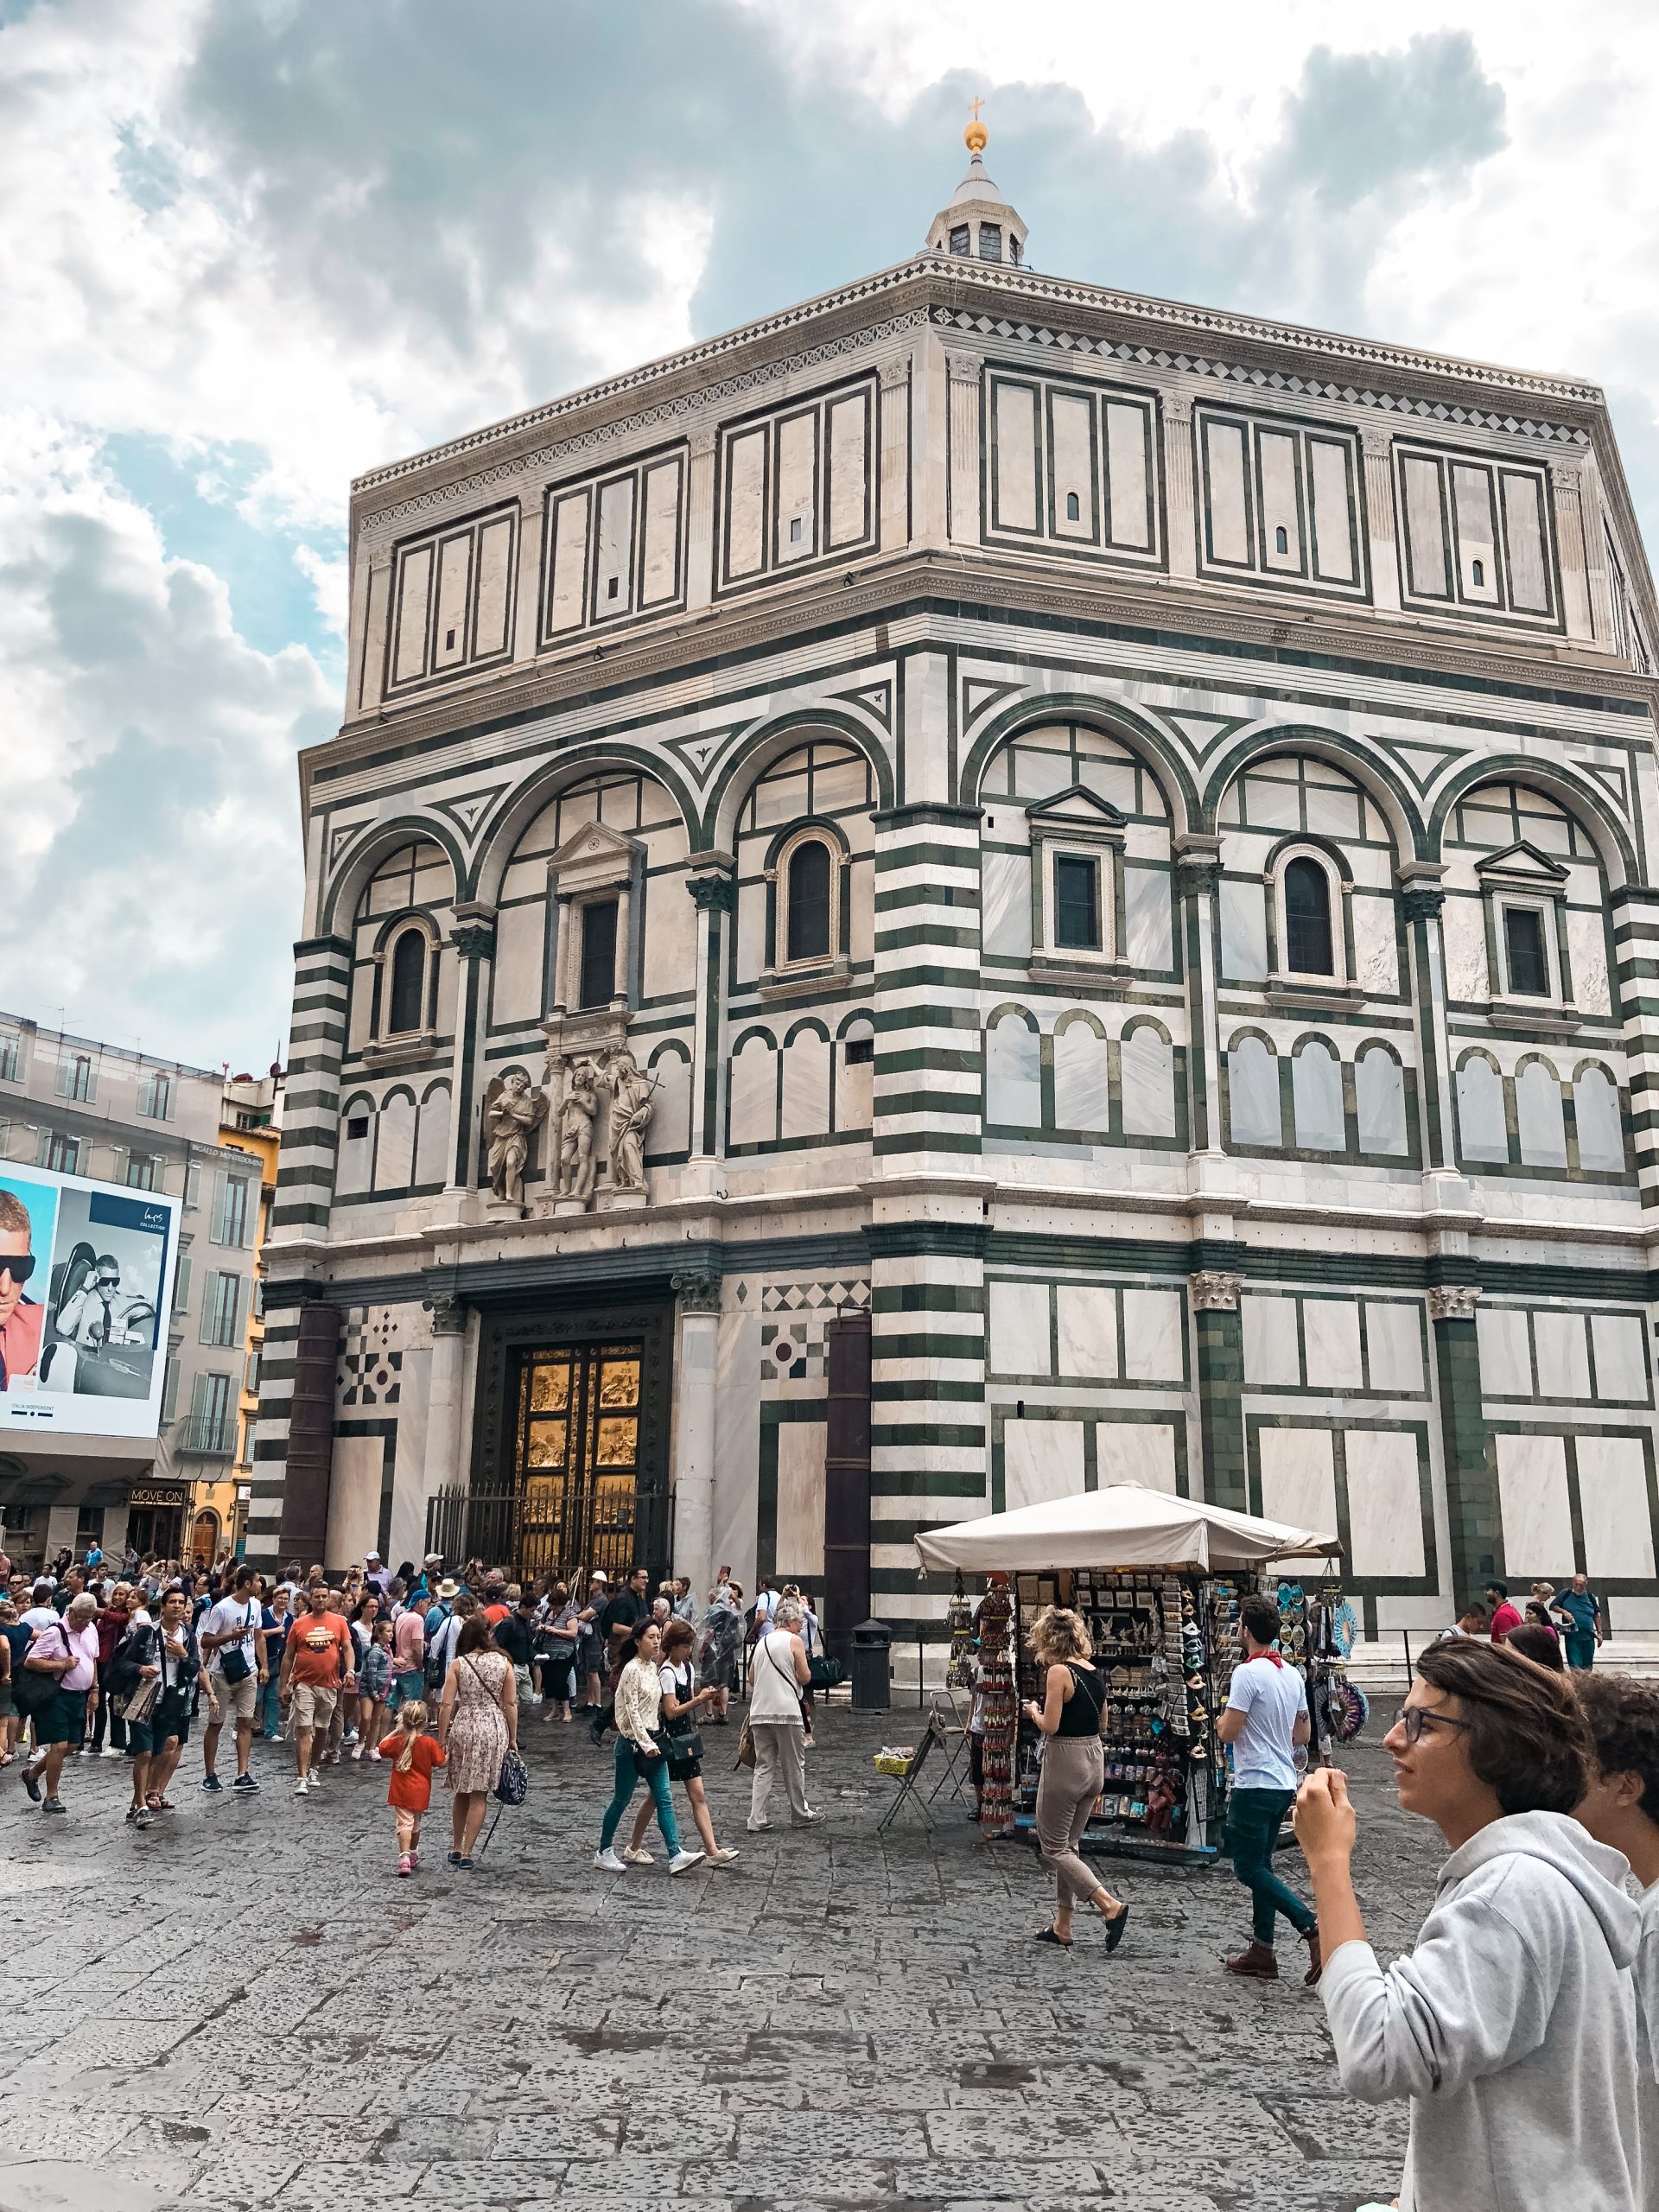 picture of Duomo Di Firenze from an angle